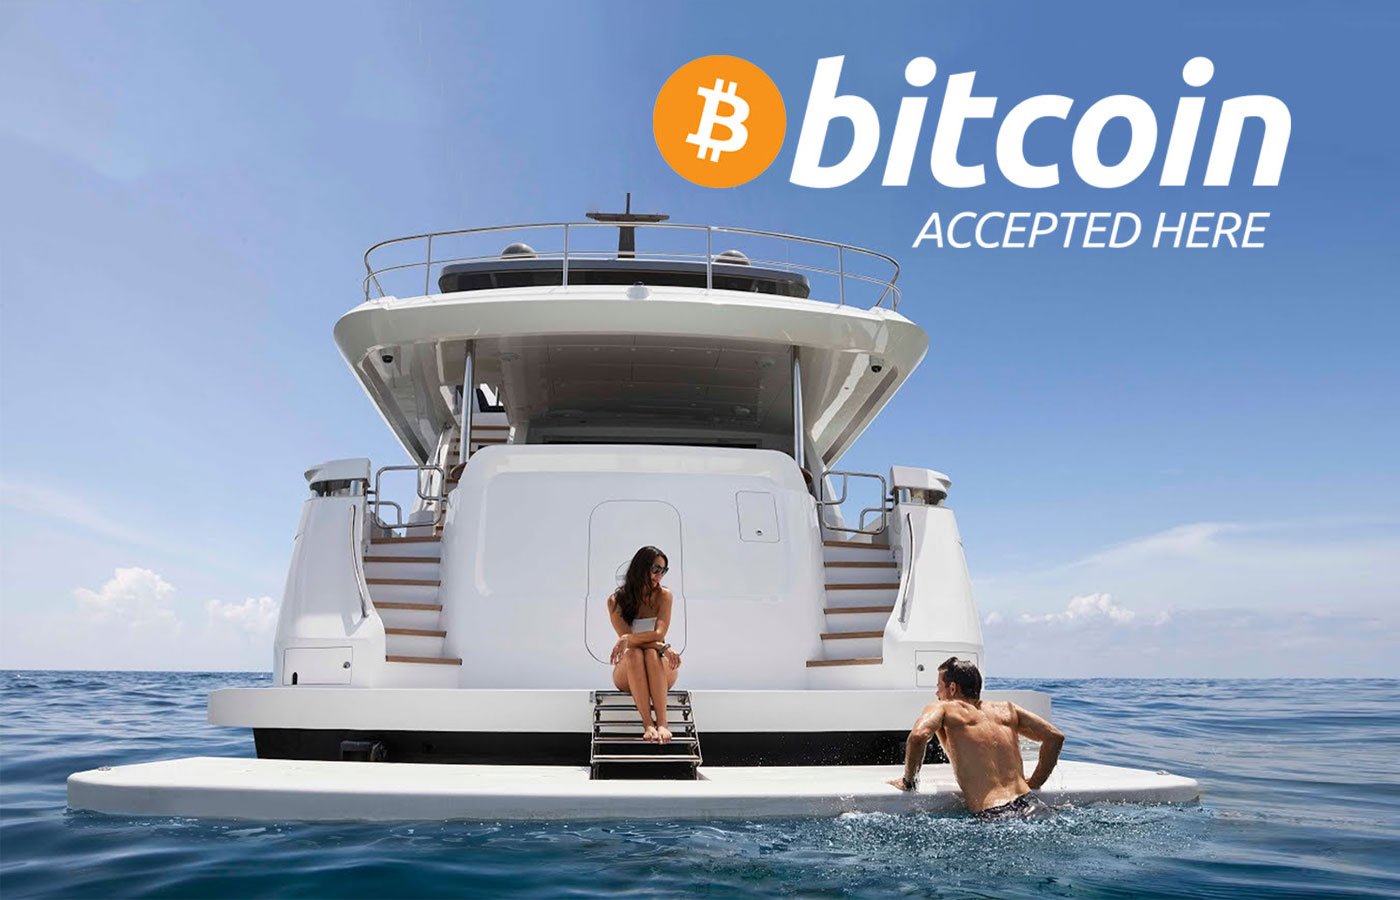 Boats And Bitcoin: Purchase + Charter A Yacht With Cryptocurrency